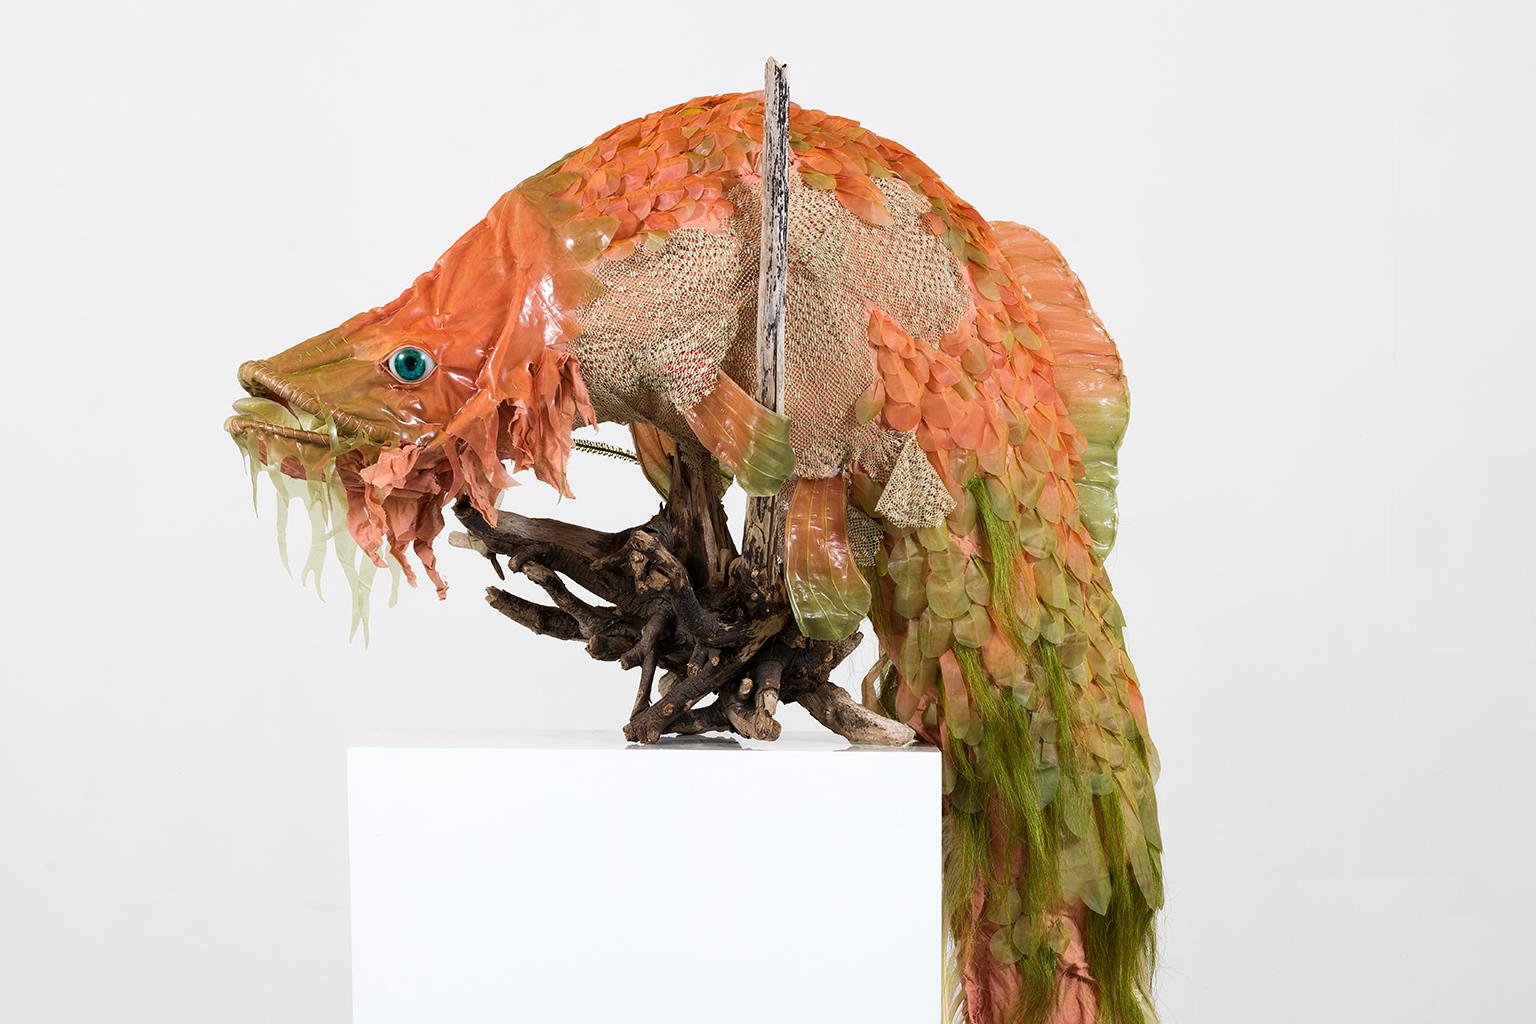 Emily Jan Figurative Sculpture - Here be dragons: the river dragon